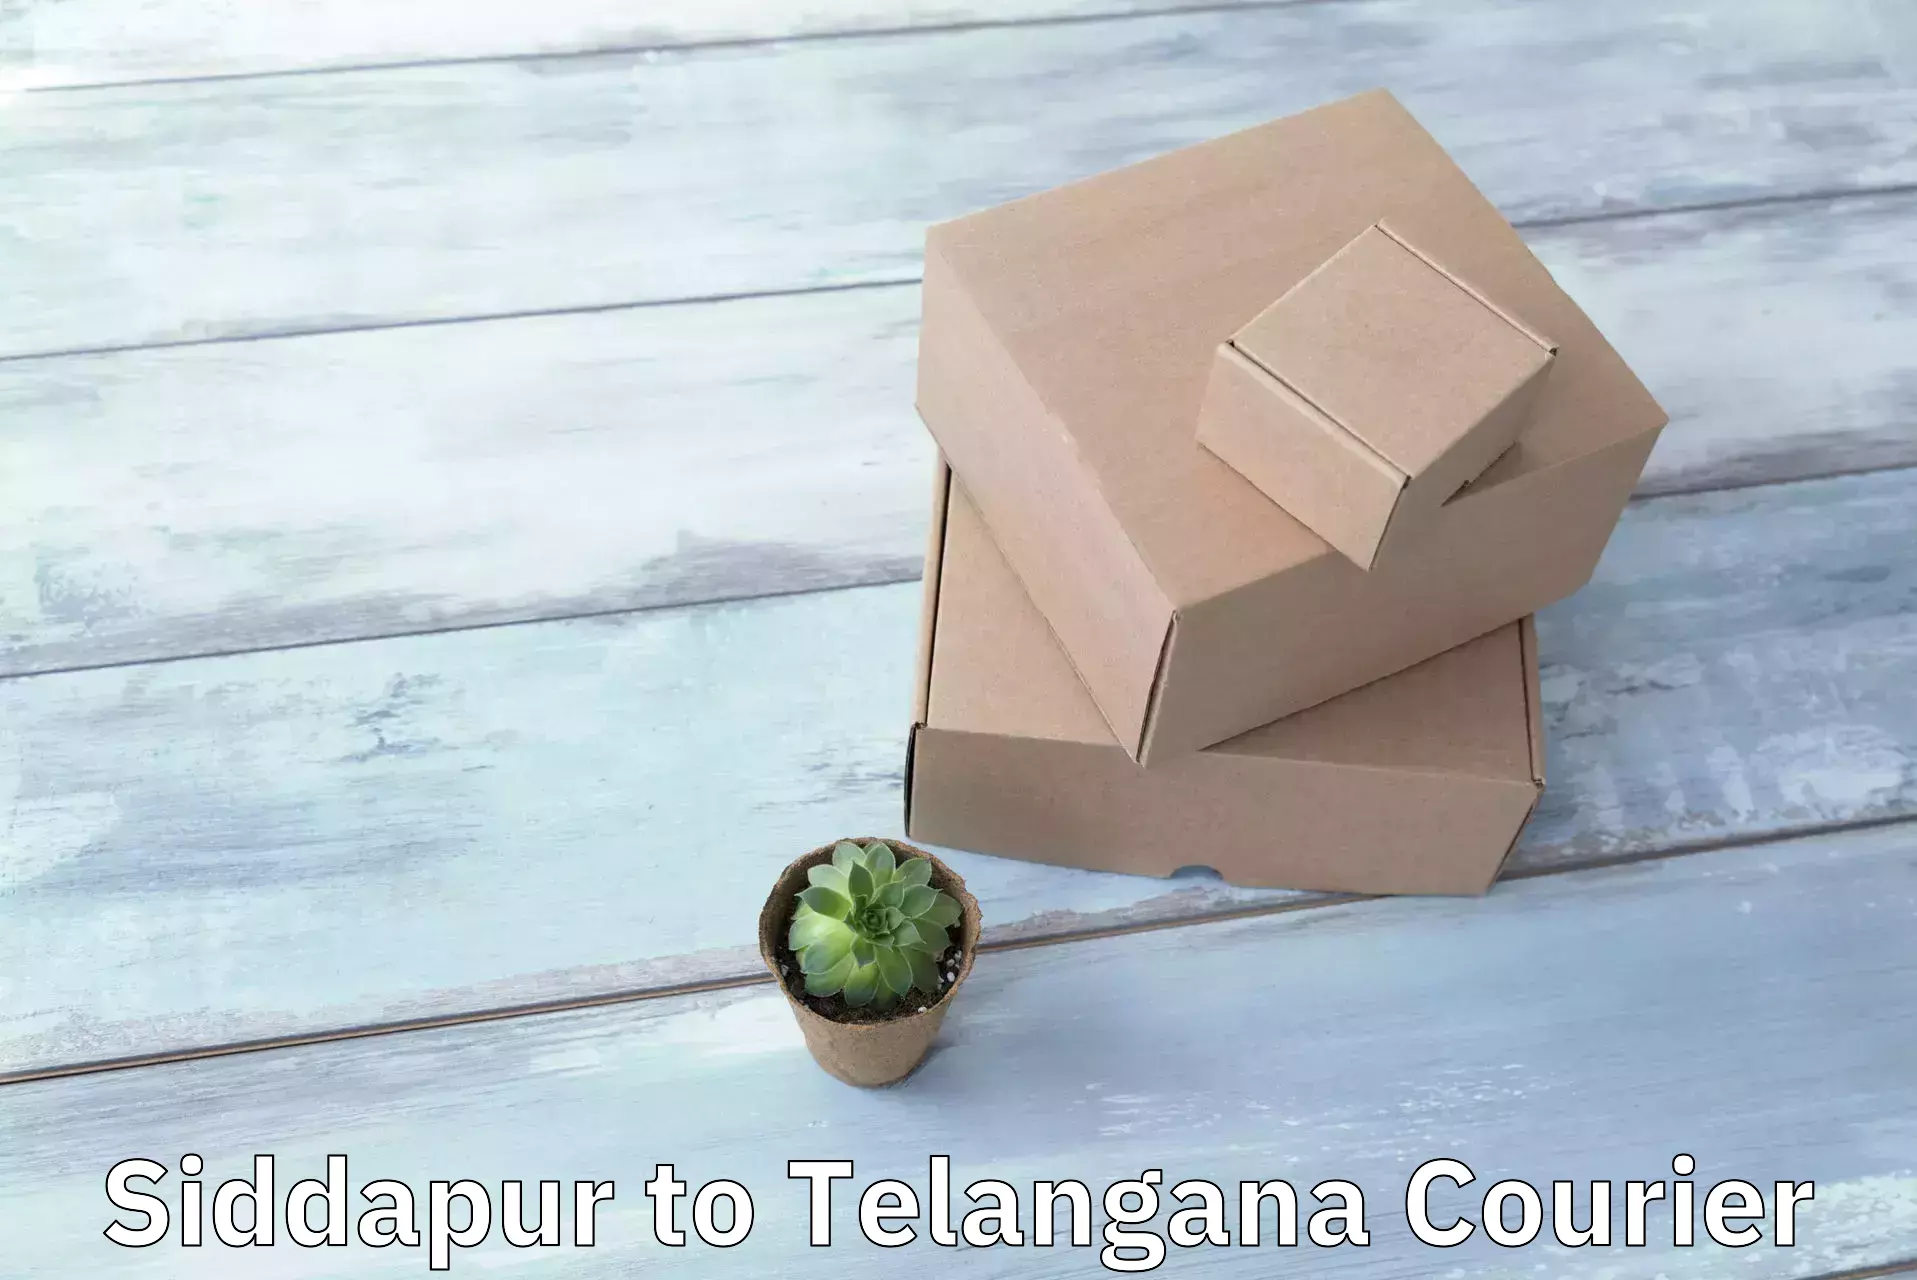 Package delivery network Siddapur to Telangana